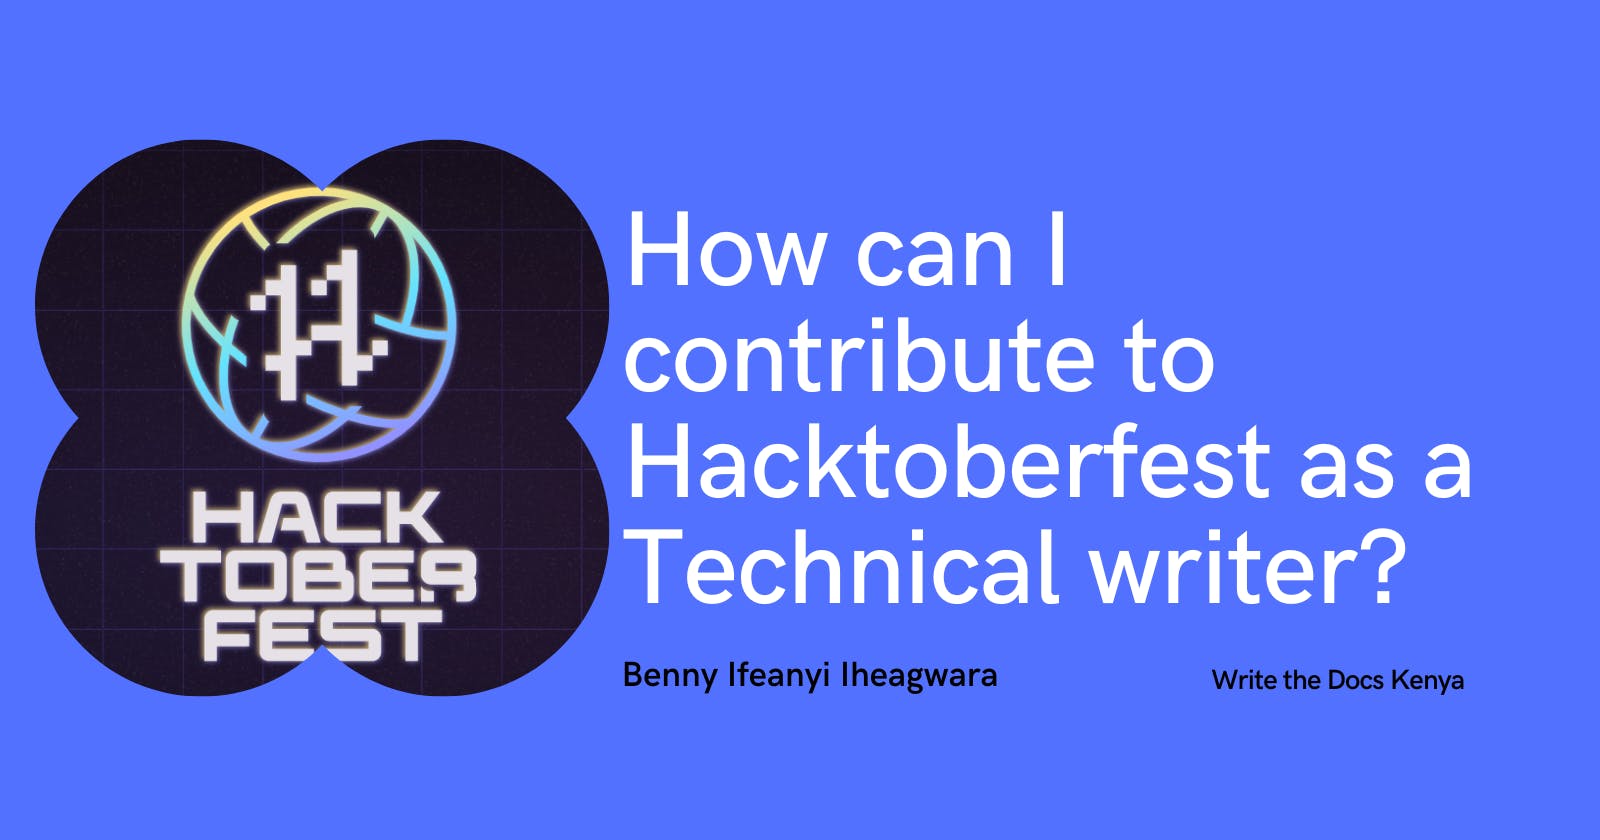 How can I contribute to Hacktoberfest as a Technical writer?